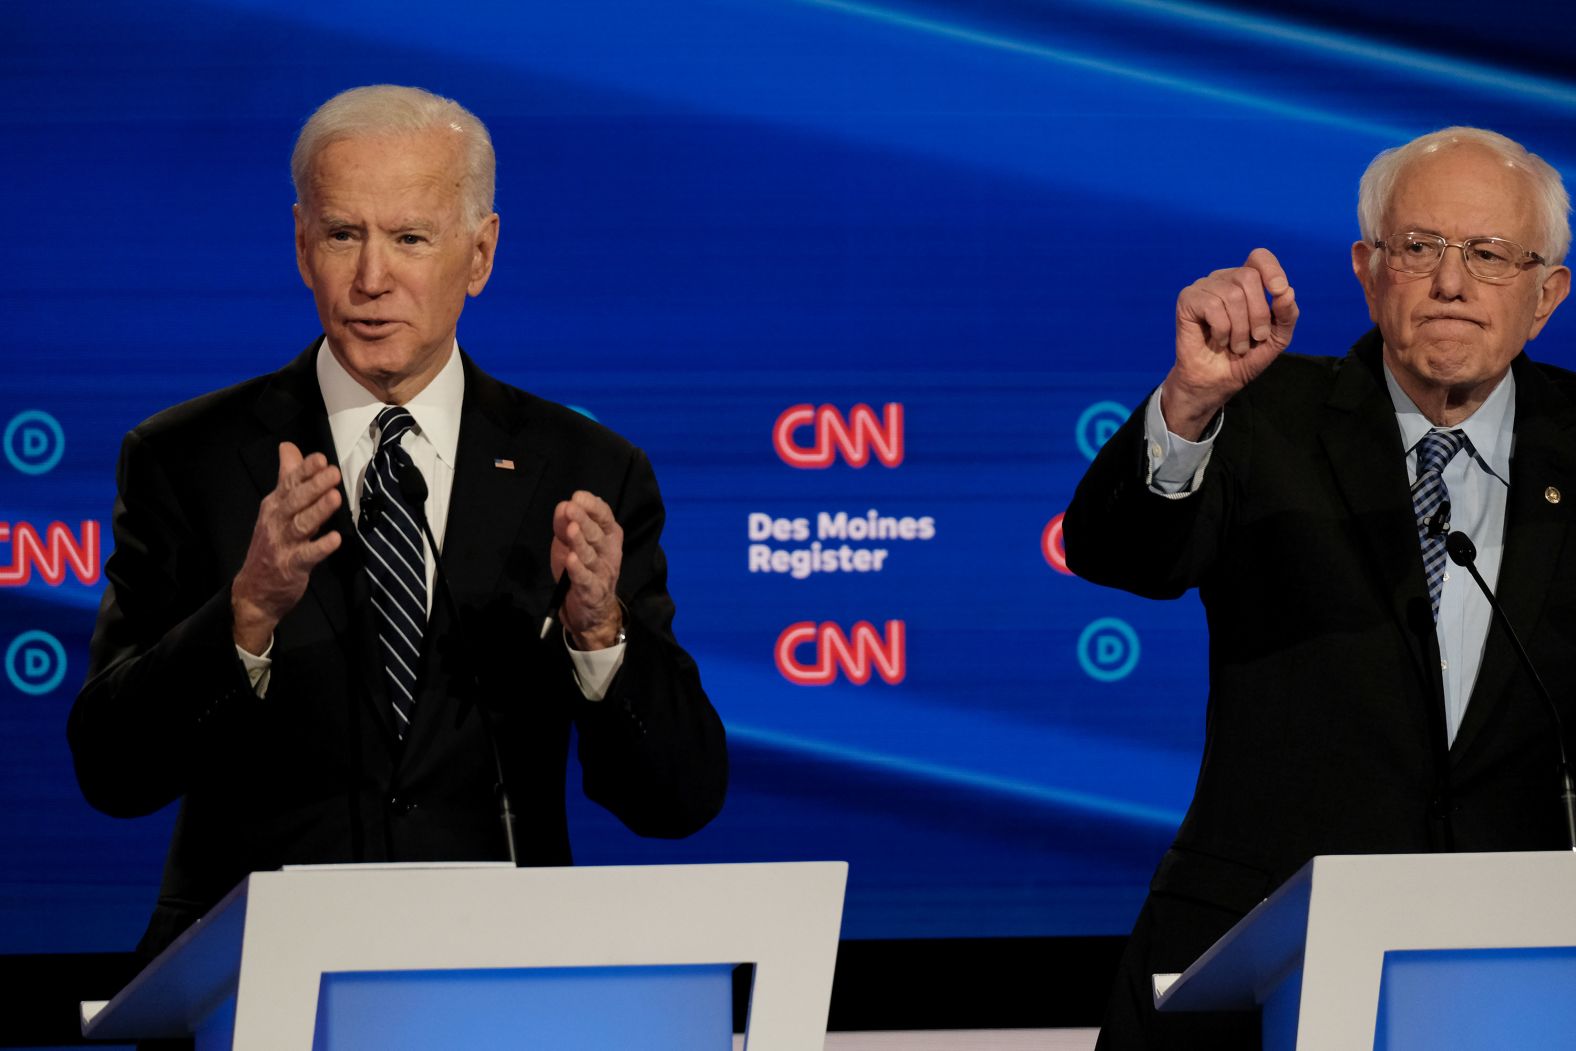 Biden answers a question as Sanders looks to be called on. Sanders leads a tight race in Iowa right now, according to the new <a href="index.php?page=&url=https%3A%2F%2Fwww.cnn.com%2F2020%2F01%2F10%2Fpolitics%2Fiowa-poll-democrats-2020%2Findex.html" target="_blank">CNN/Des Moines Register/Mediacom poll.</a> Biden, the national front-runner, is part of a tightly bunched top tier.